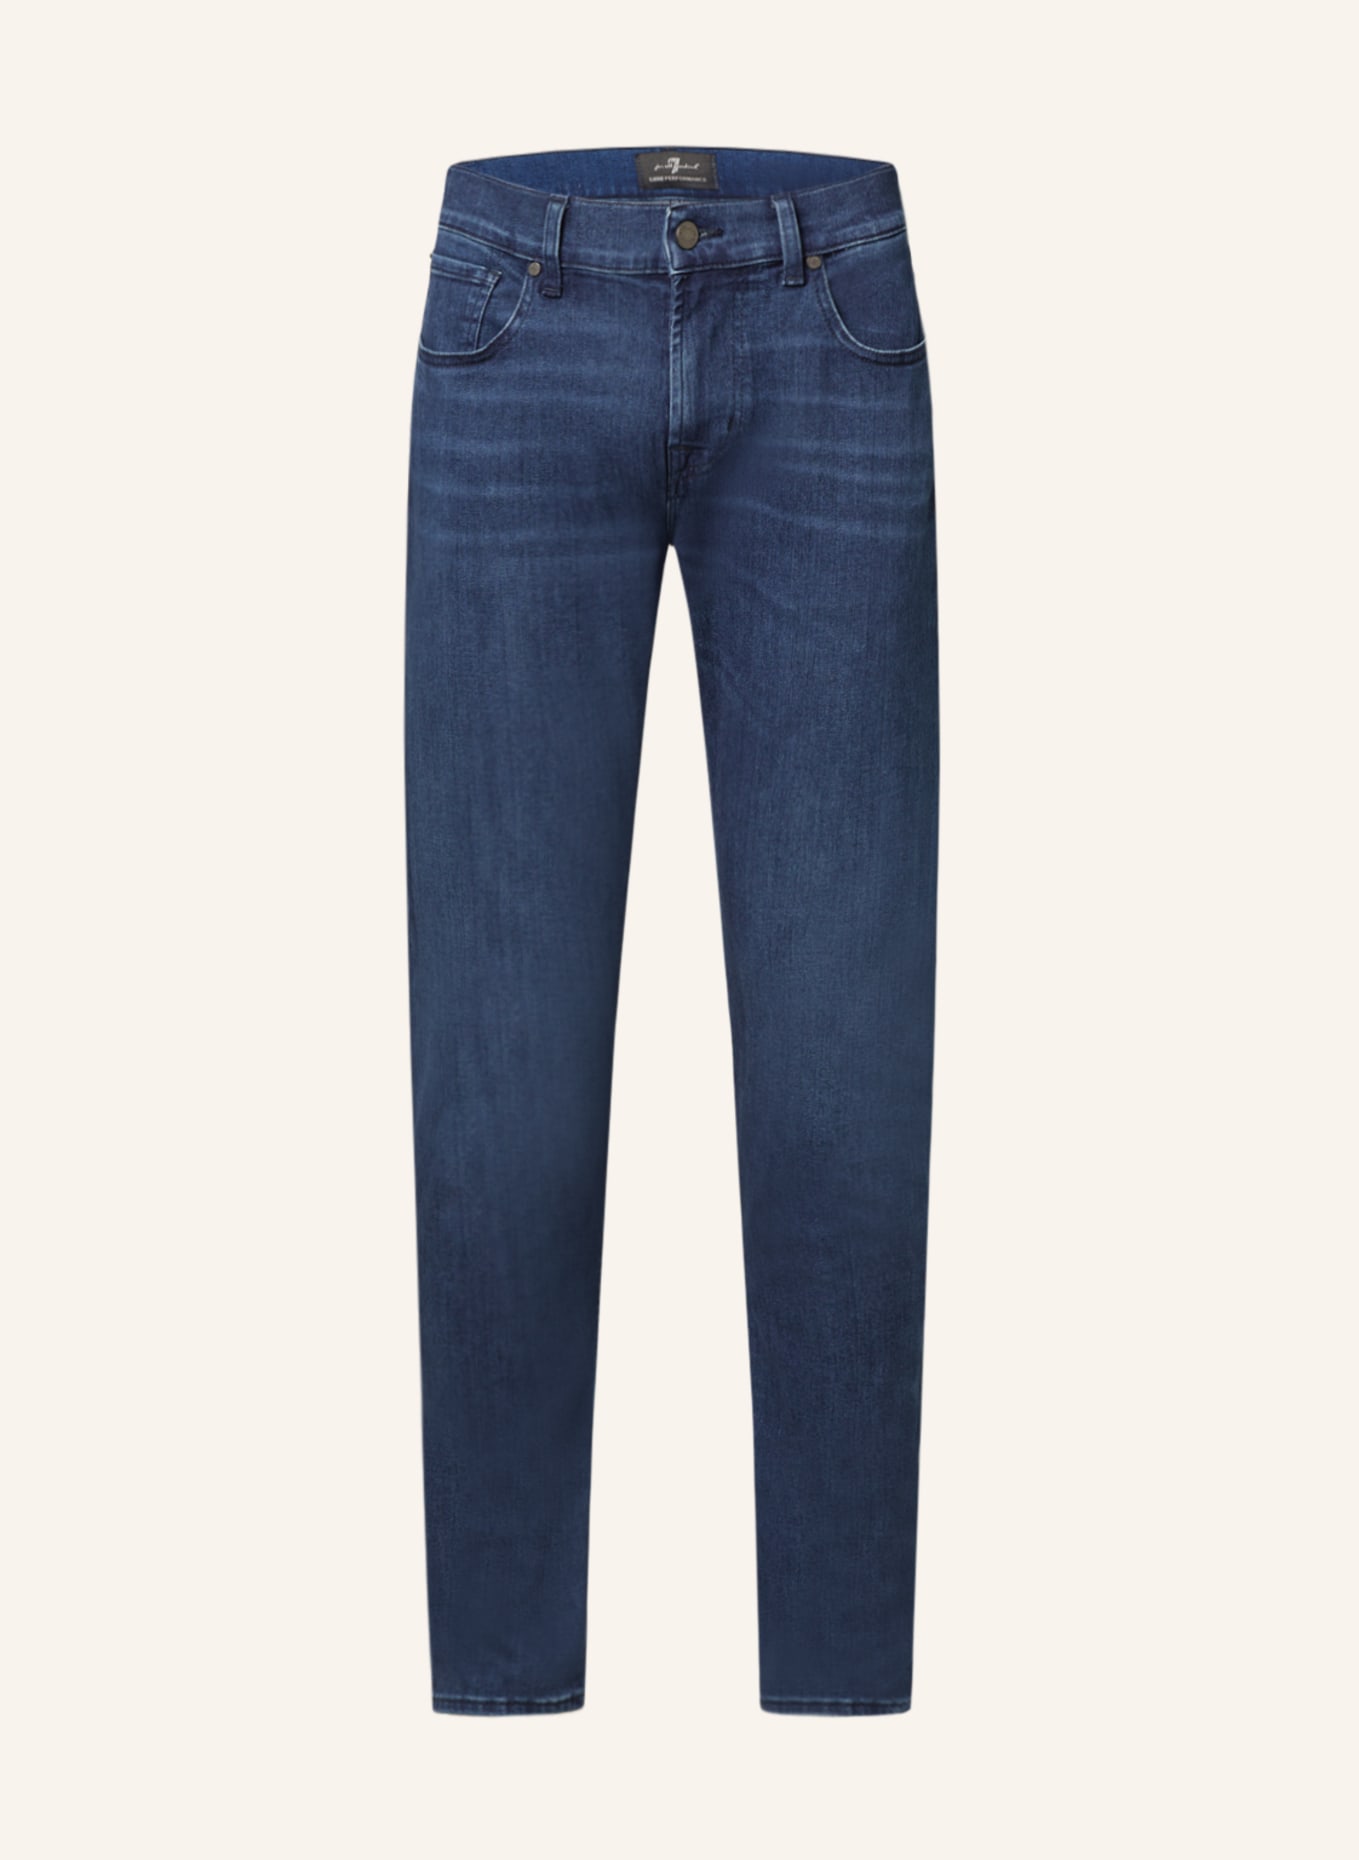 7 for all mankind Jeans Slimmy Tapered Fit, Farbe: MID BLUE (Bild 1)